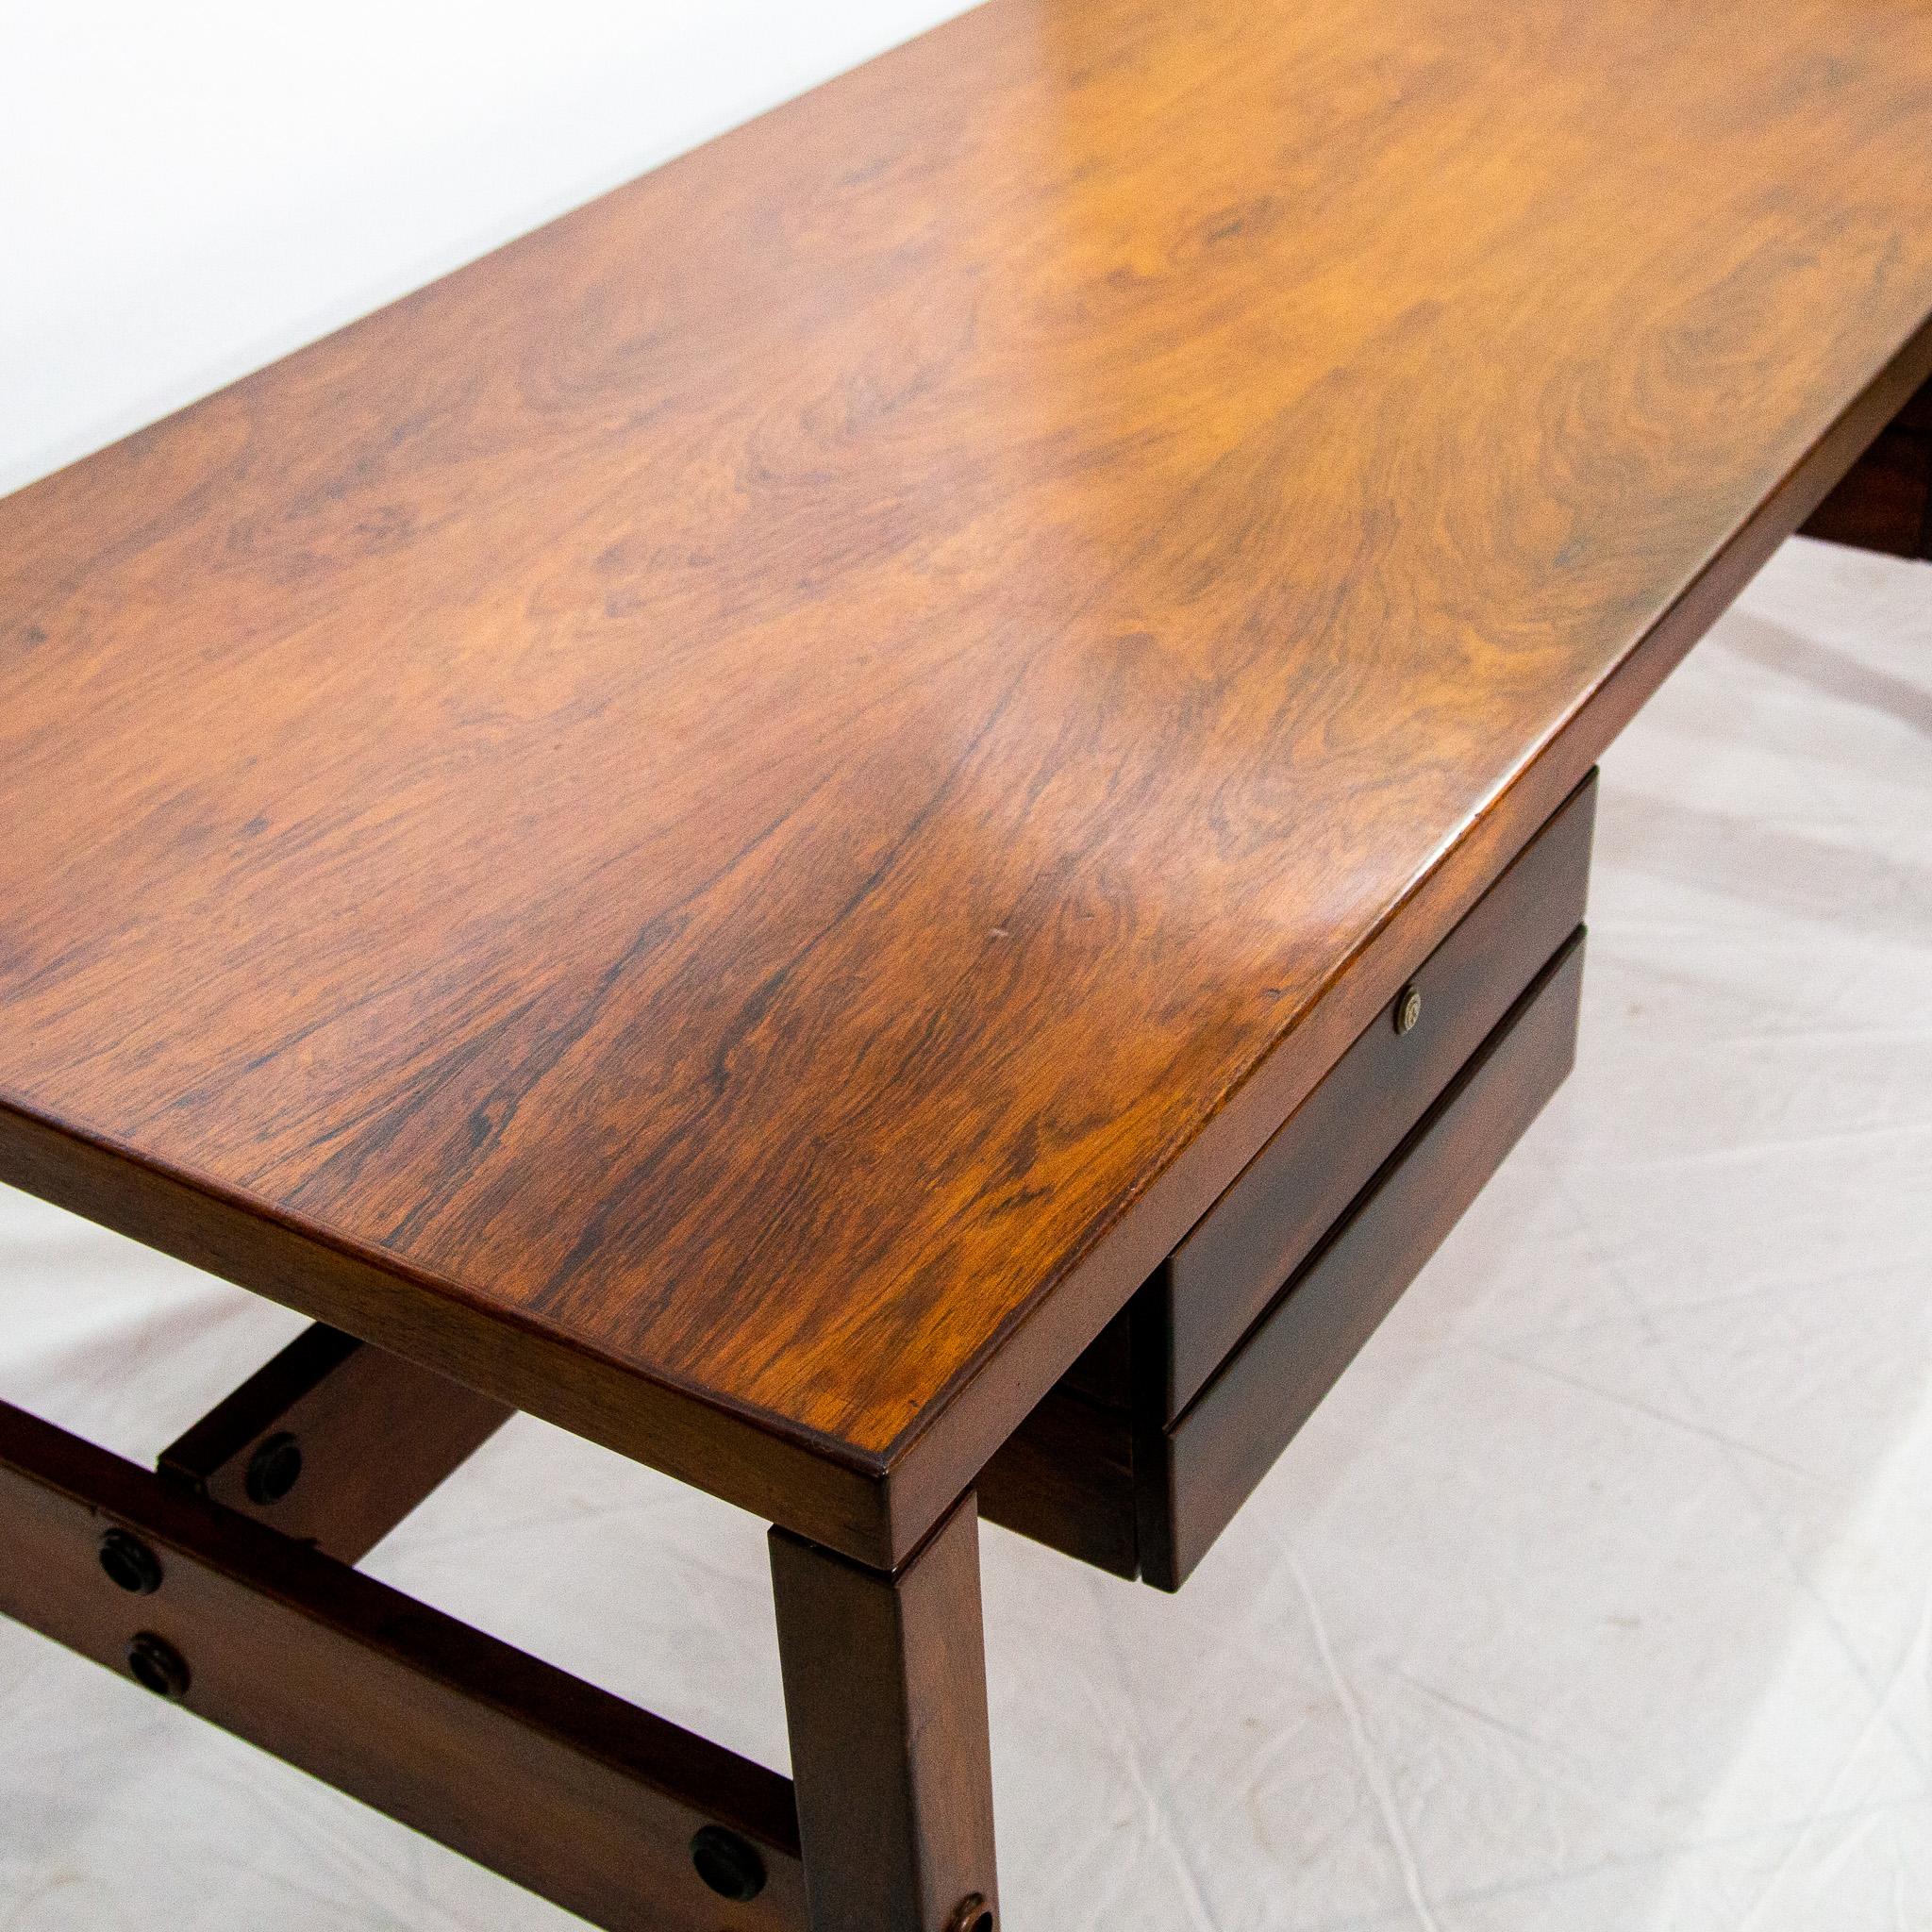 Brazilian Modern Desk in Hardwood with Floating Drawers, Sergio Rodrigues, 1960s For Sale 3